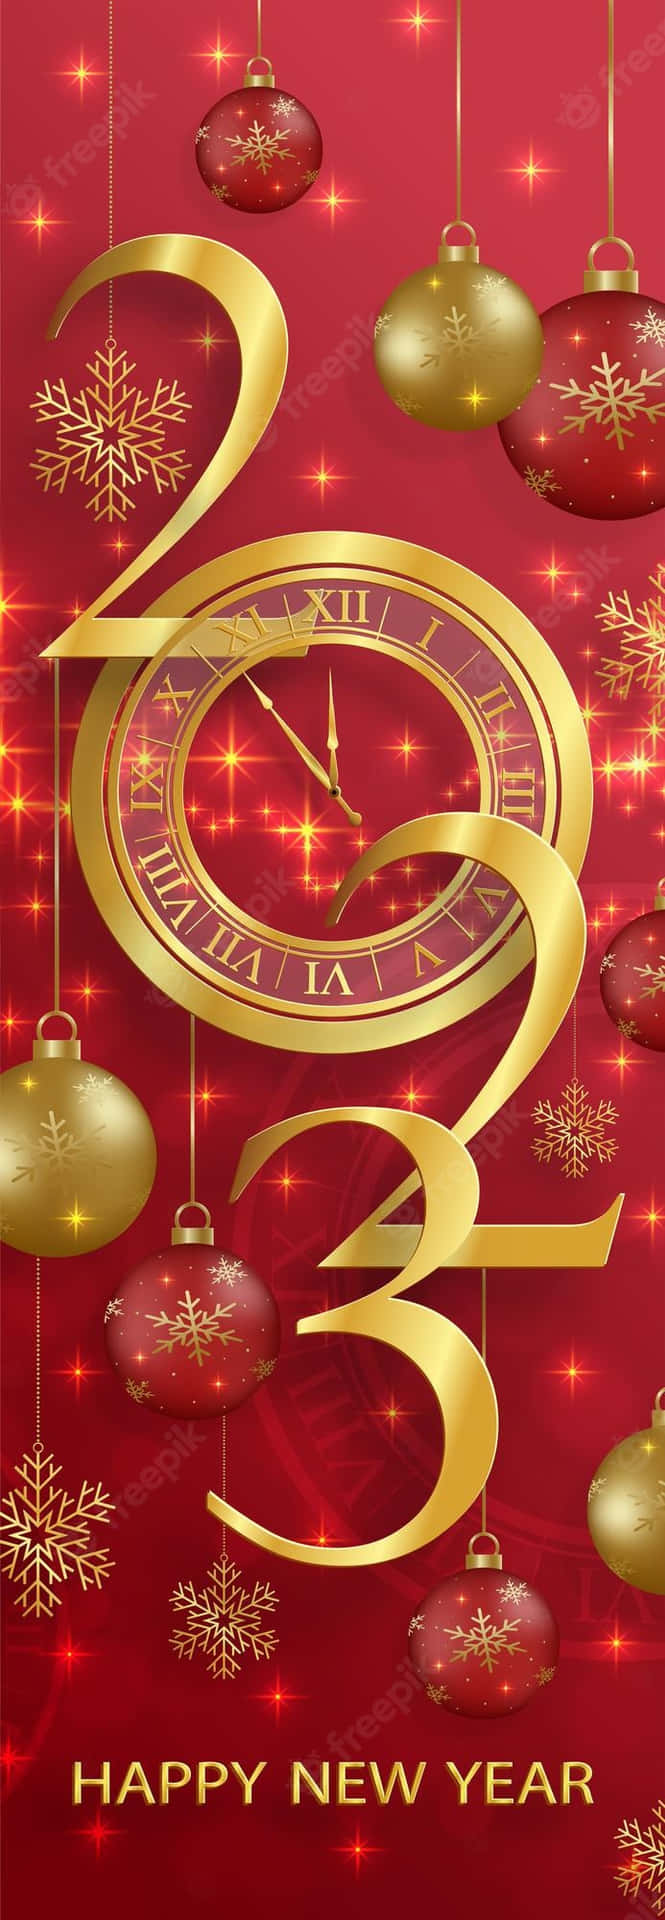 Red And Gold New Year Phone Wallpaper